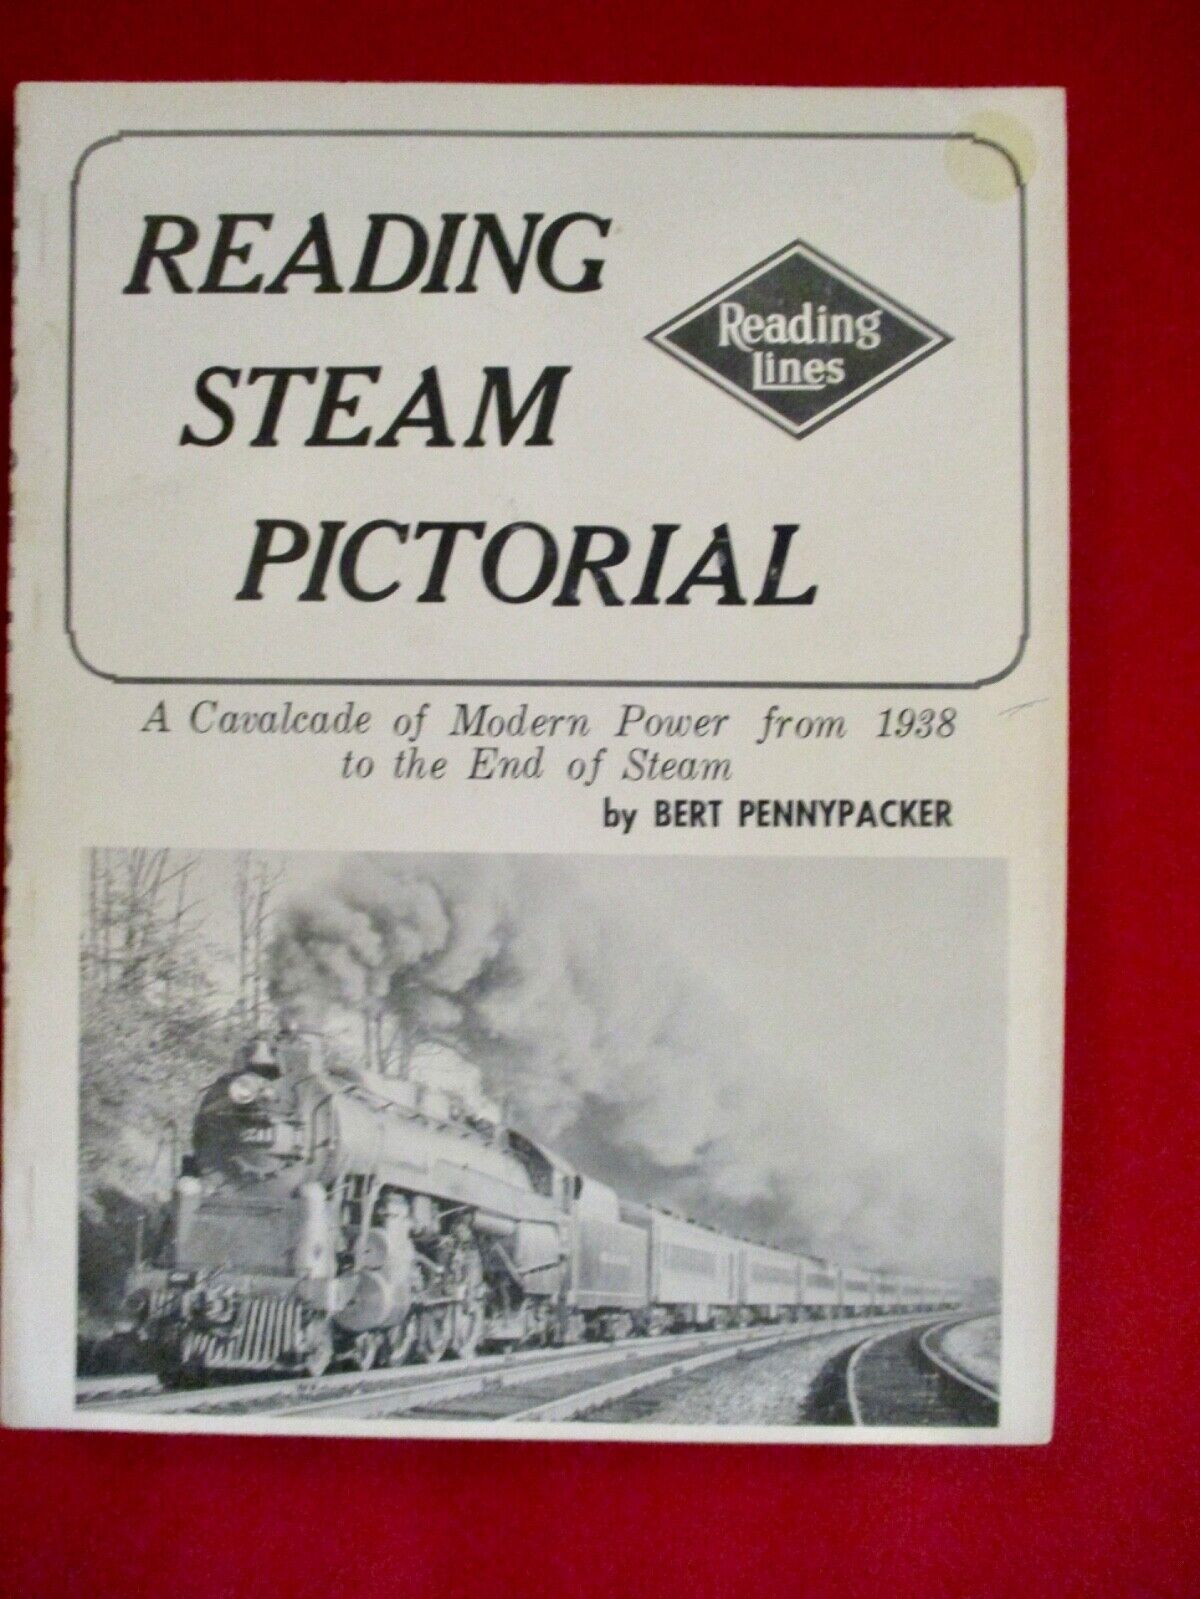 READING Steam PICTORIAL Modern Power from 1938 to the End of Steam PENNYPACKER